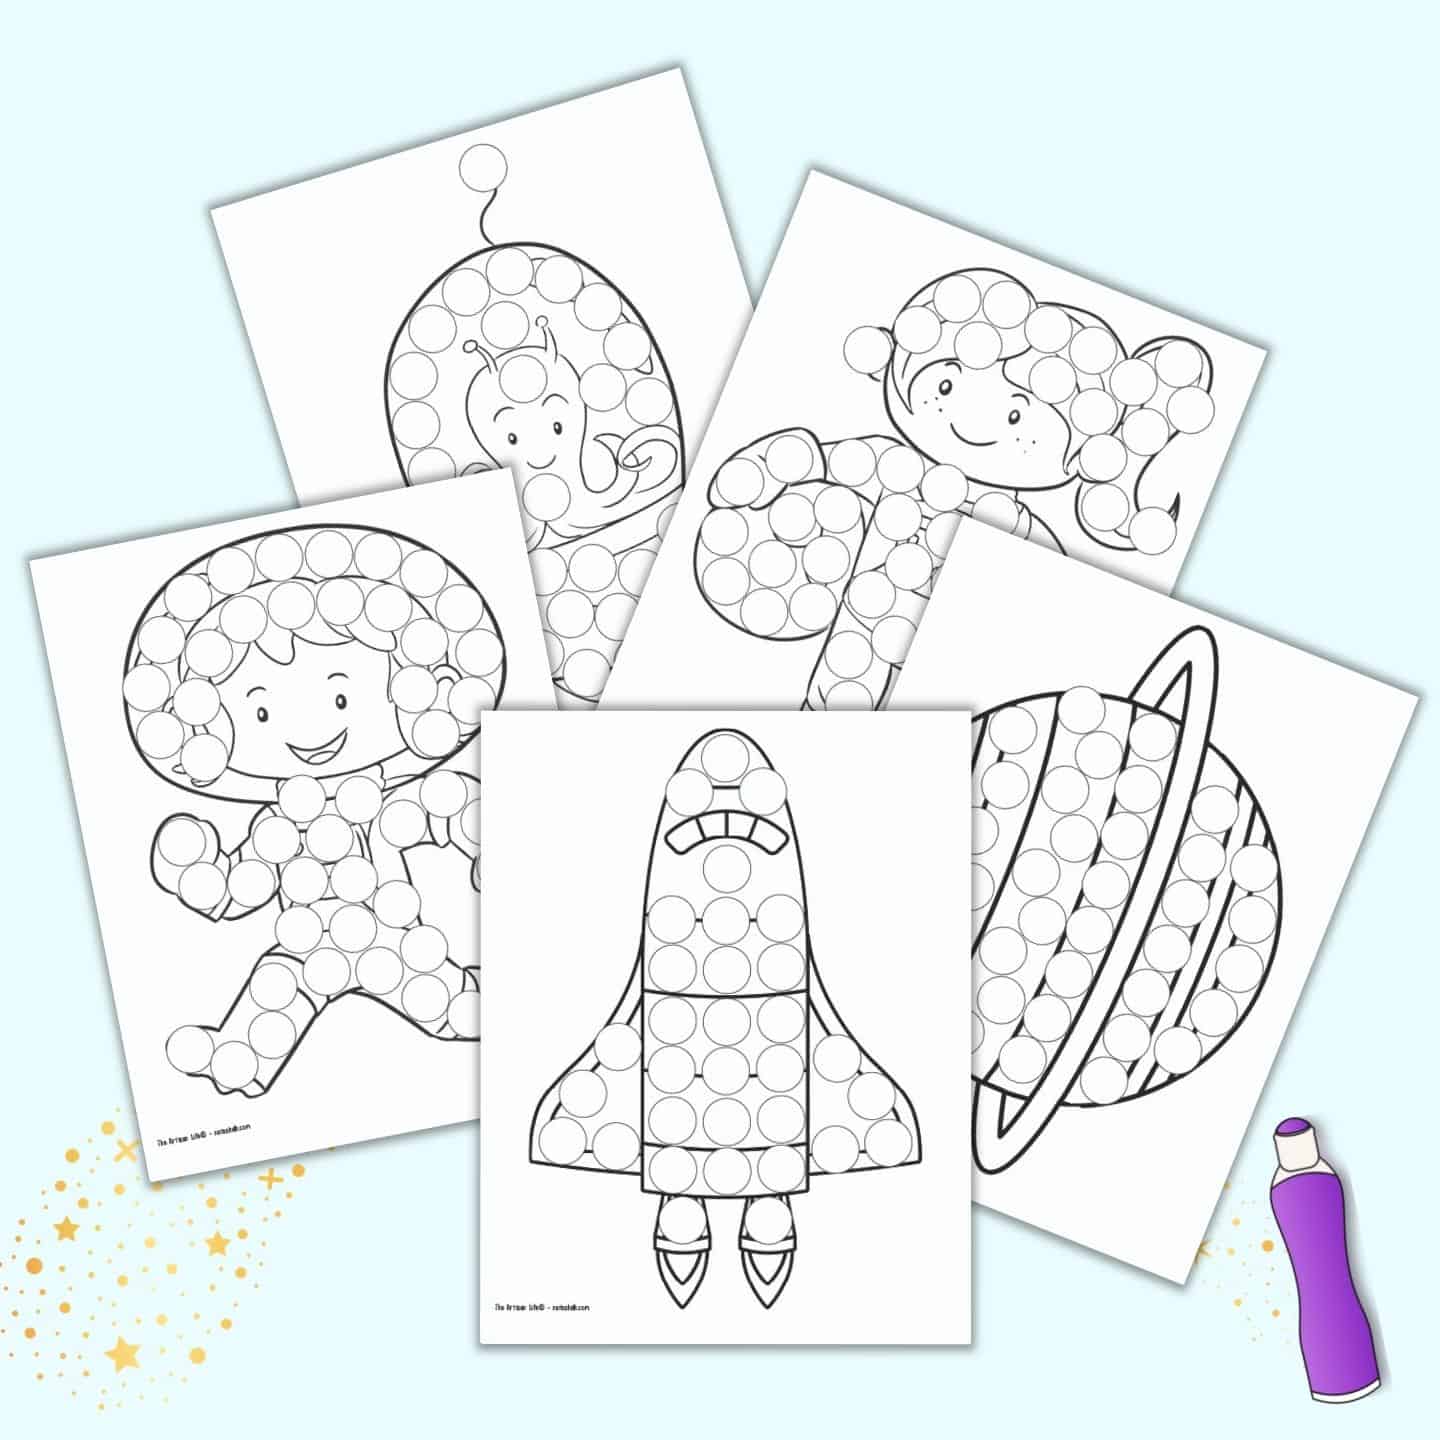 Dot marker coloring pages